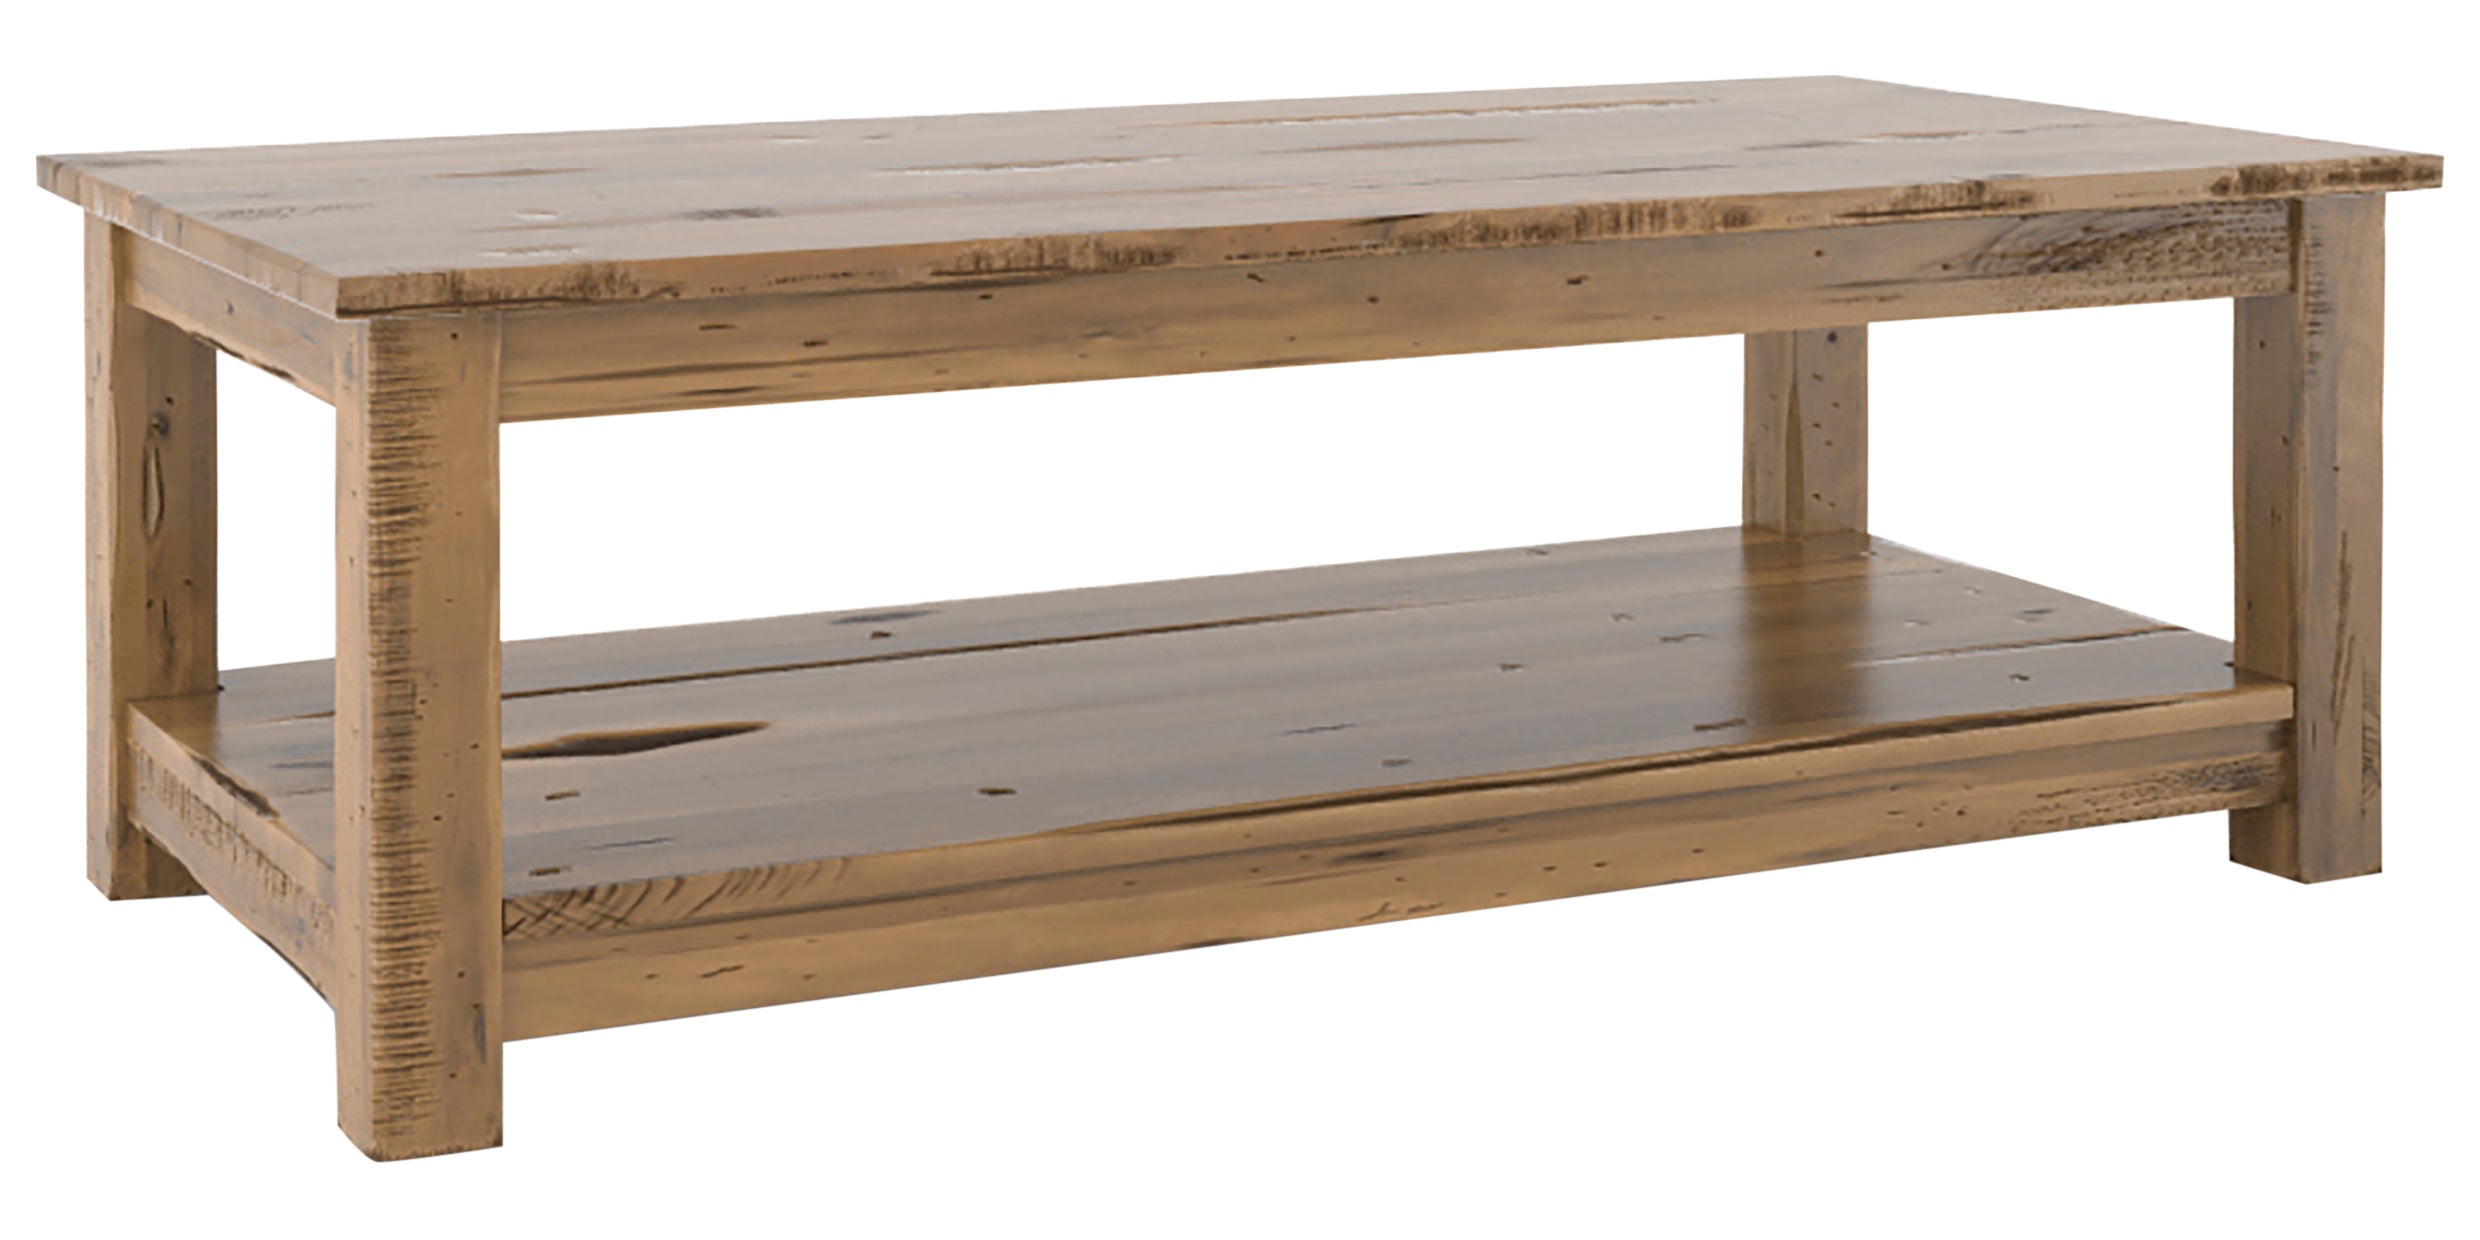 Oak Washed with HJ Legs | Canadel Champlain Coffee Table 2754 | Valley Ridge Furniture